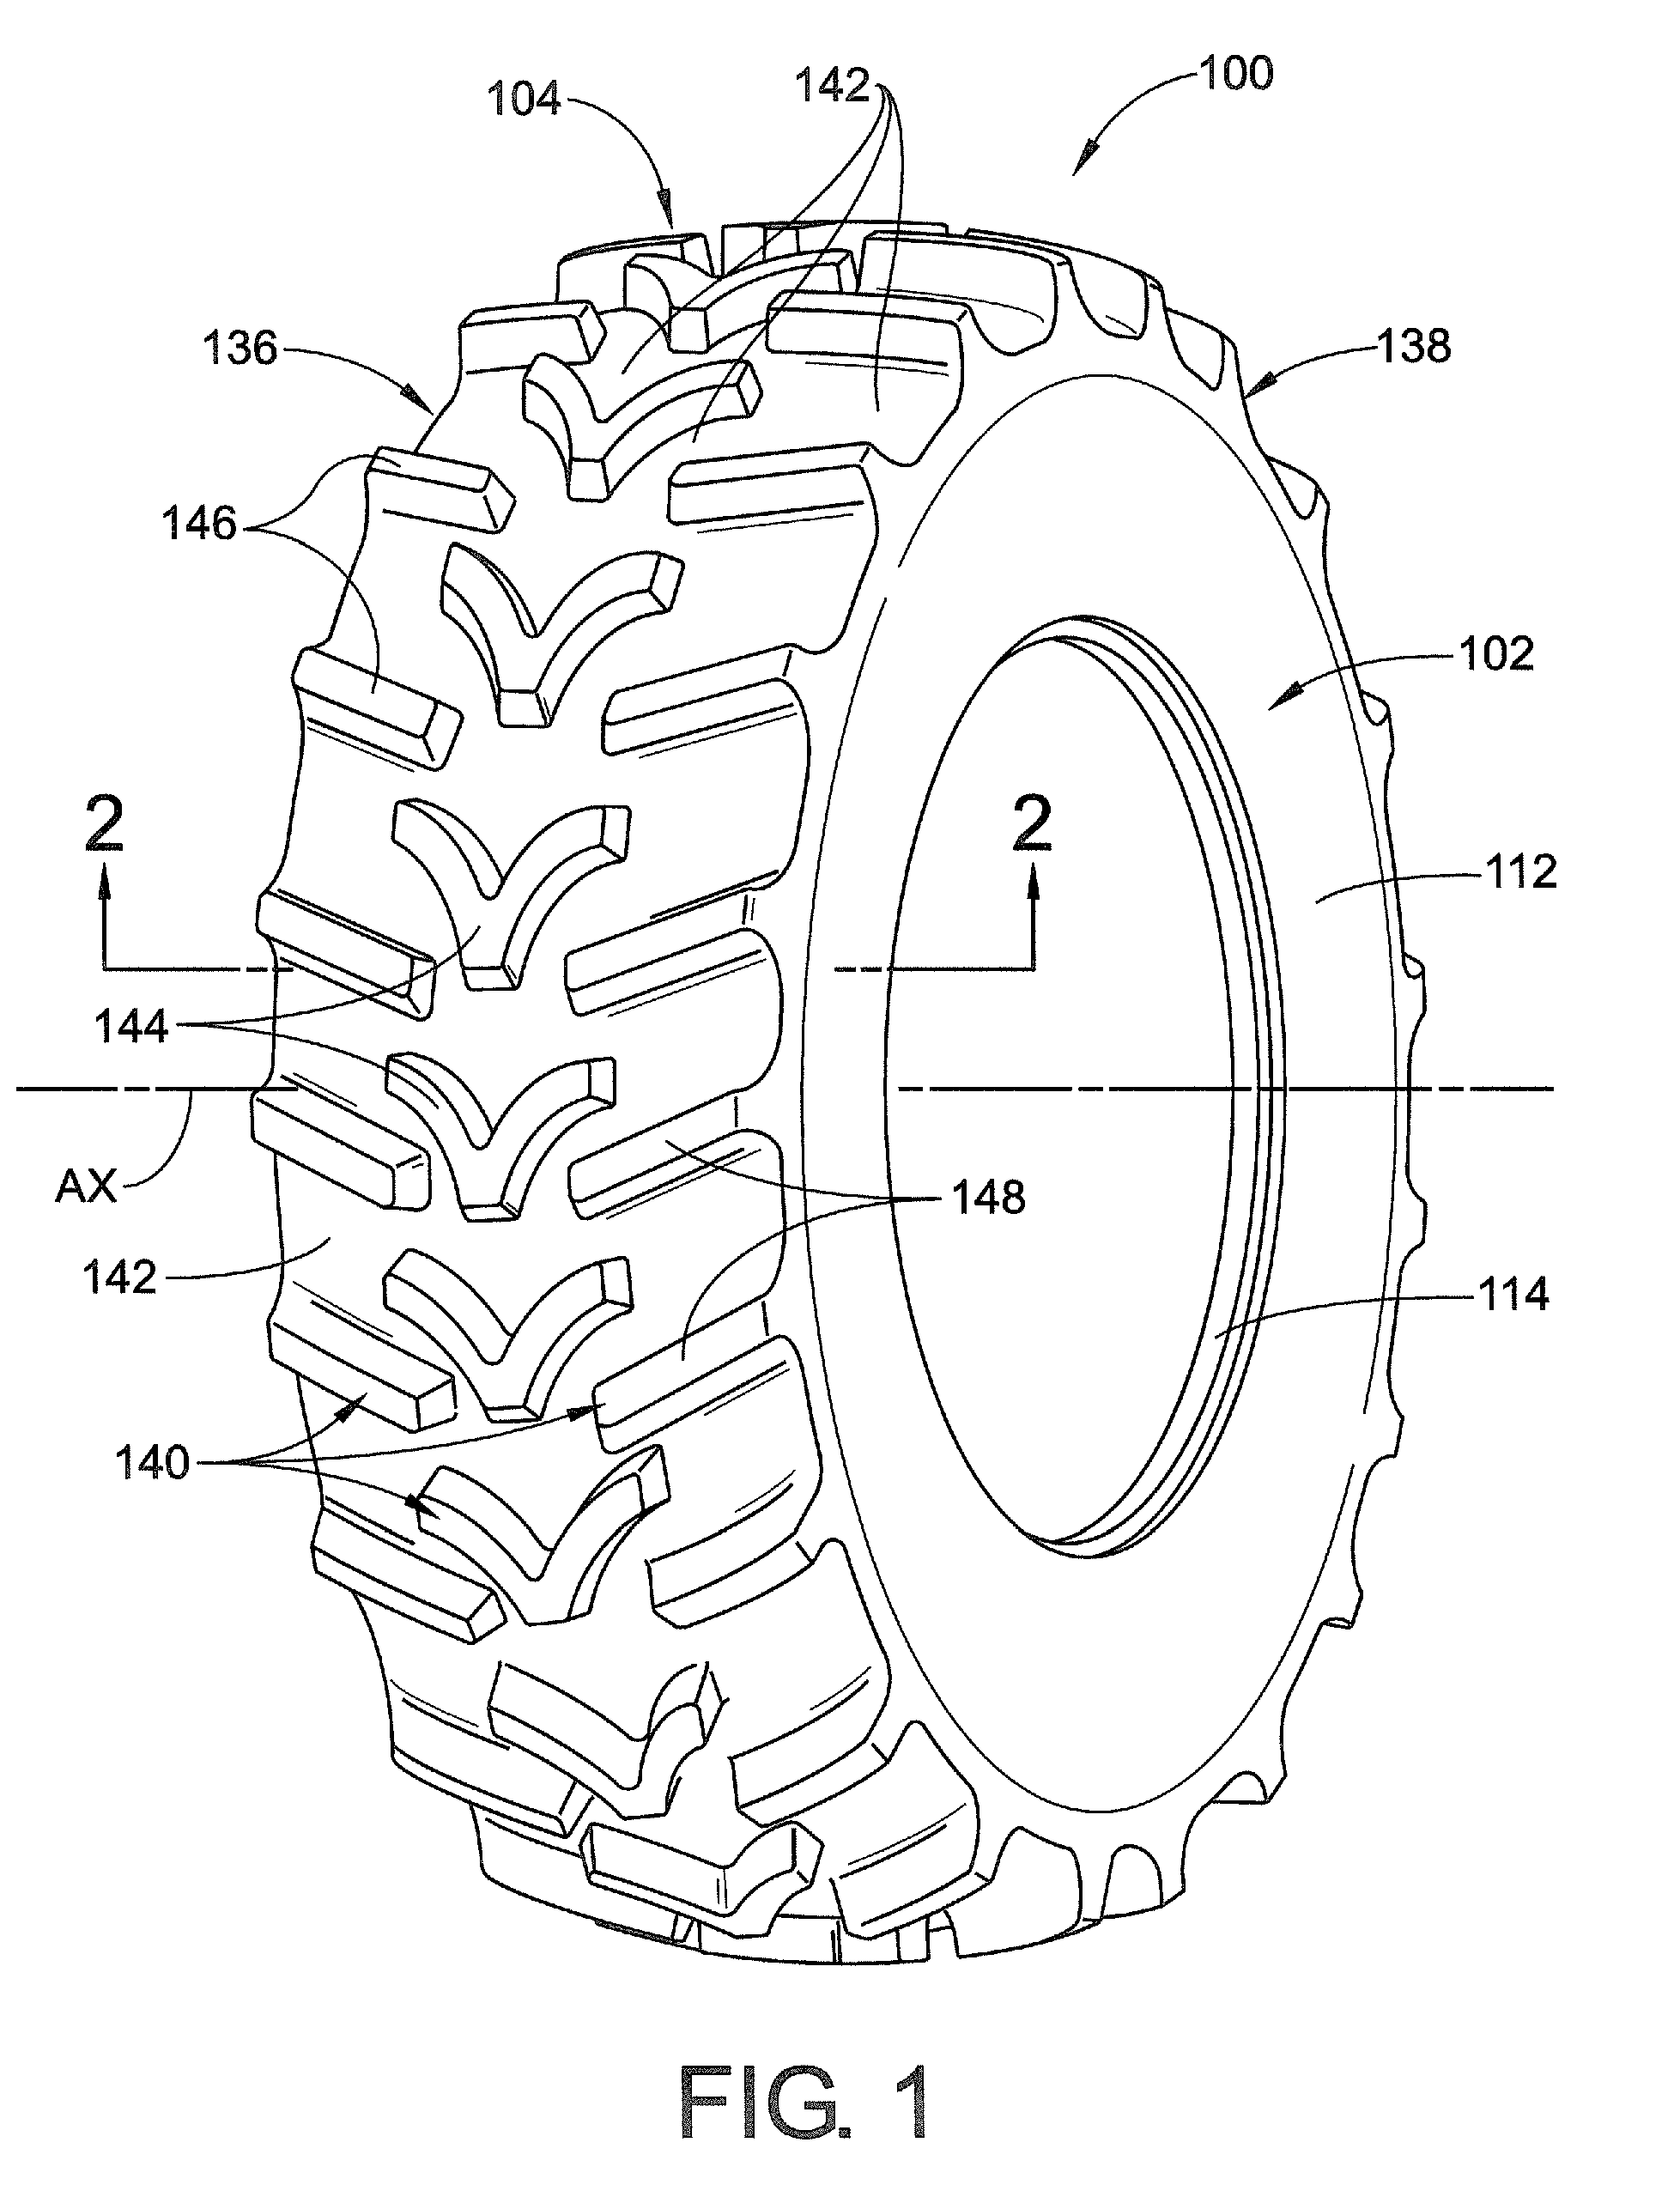 Tire with noise-reducing tread pattern